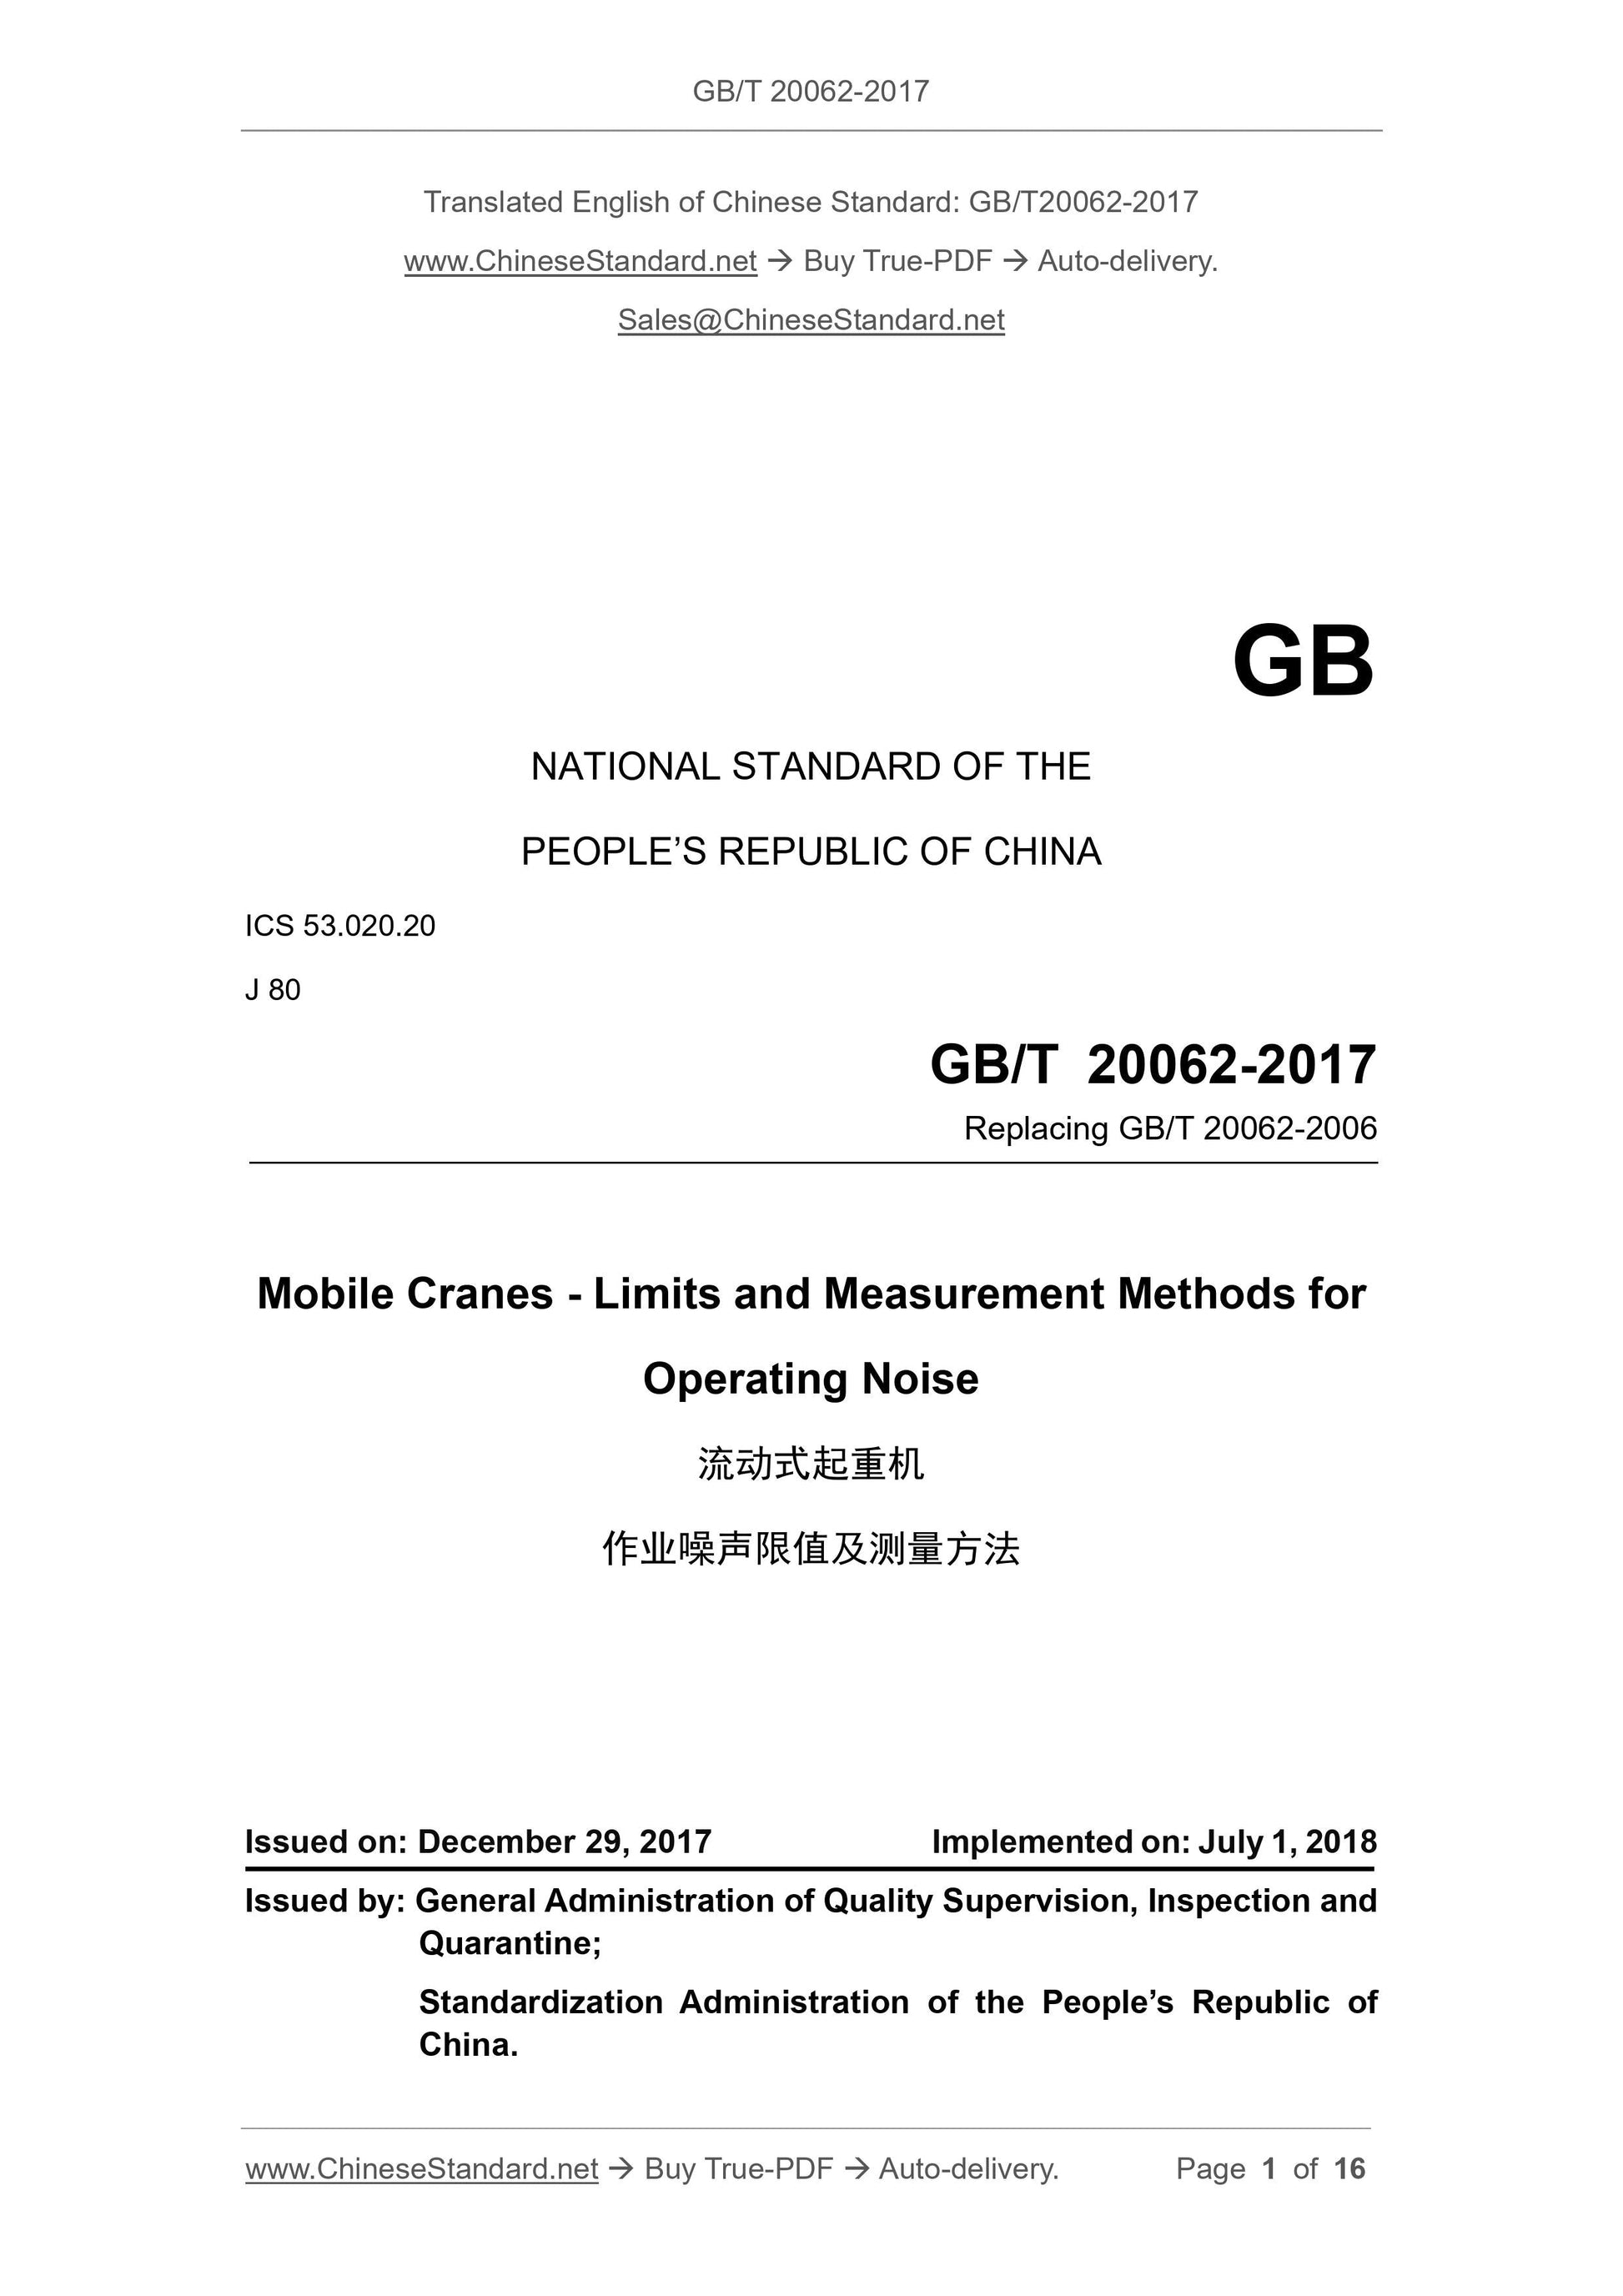 GB/T 20062-2017 Page 1